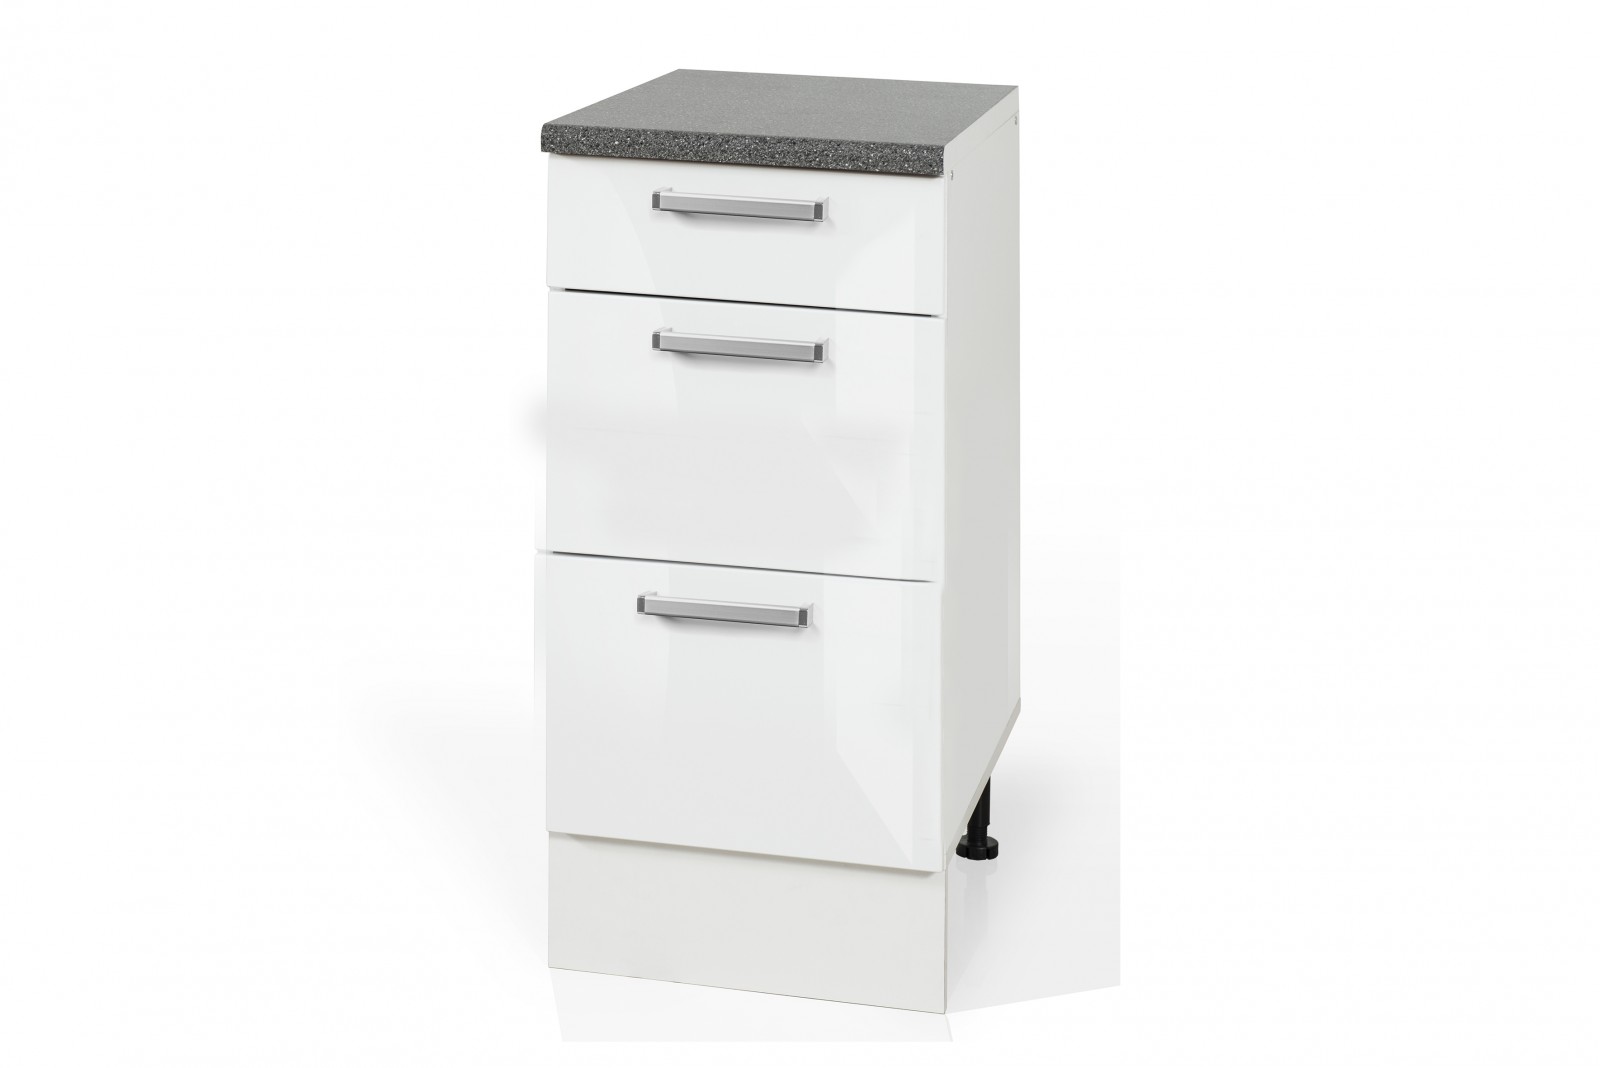 High Gloss White Base drawer cabinet S40SZ3 for kitchen